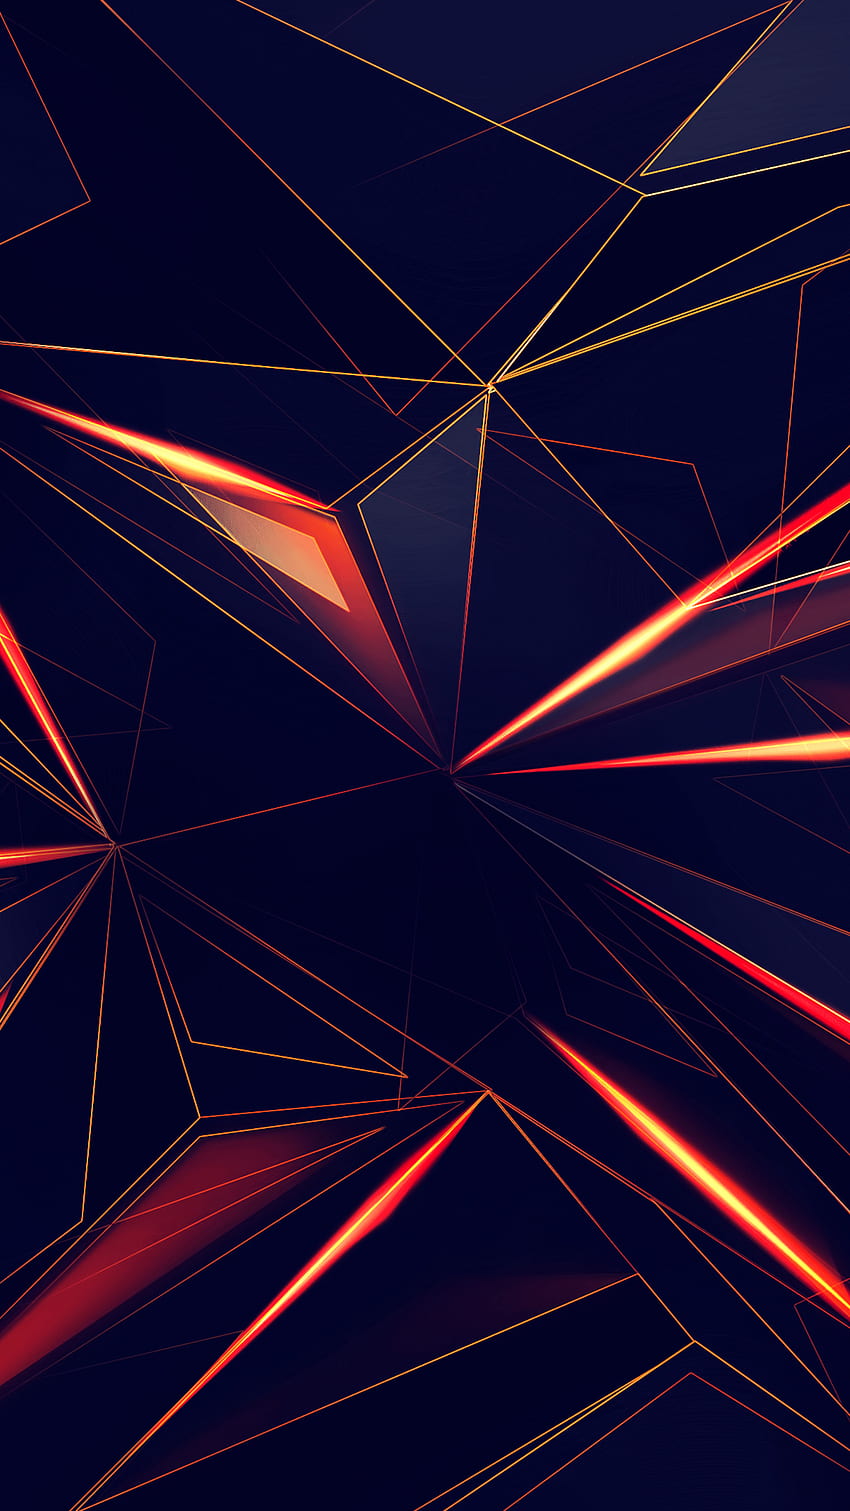 3D Shapes Abstract Lines Sony Xperia X, XZ, Z5 HD phone wallpaper